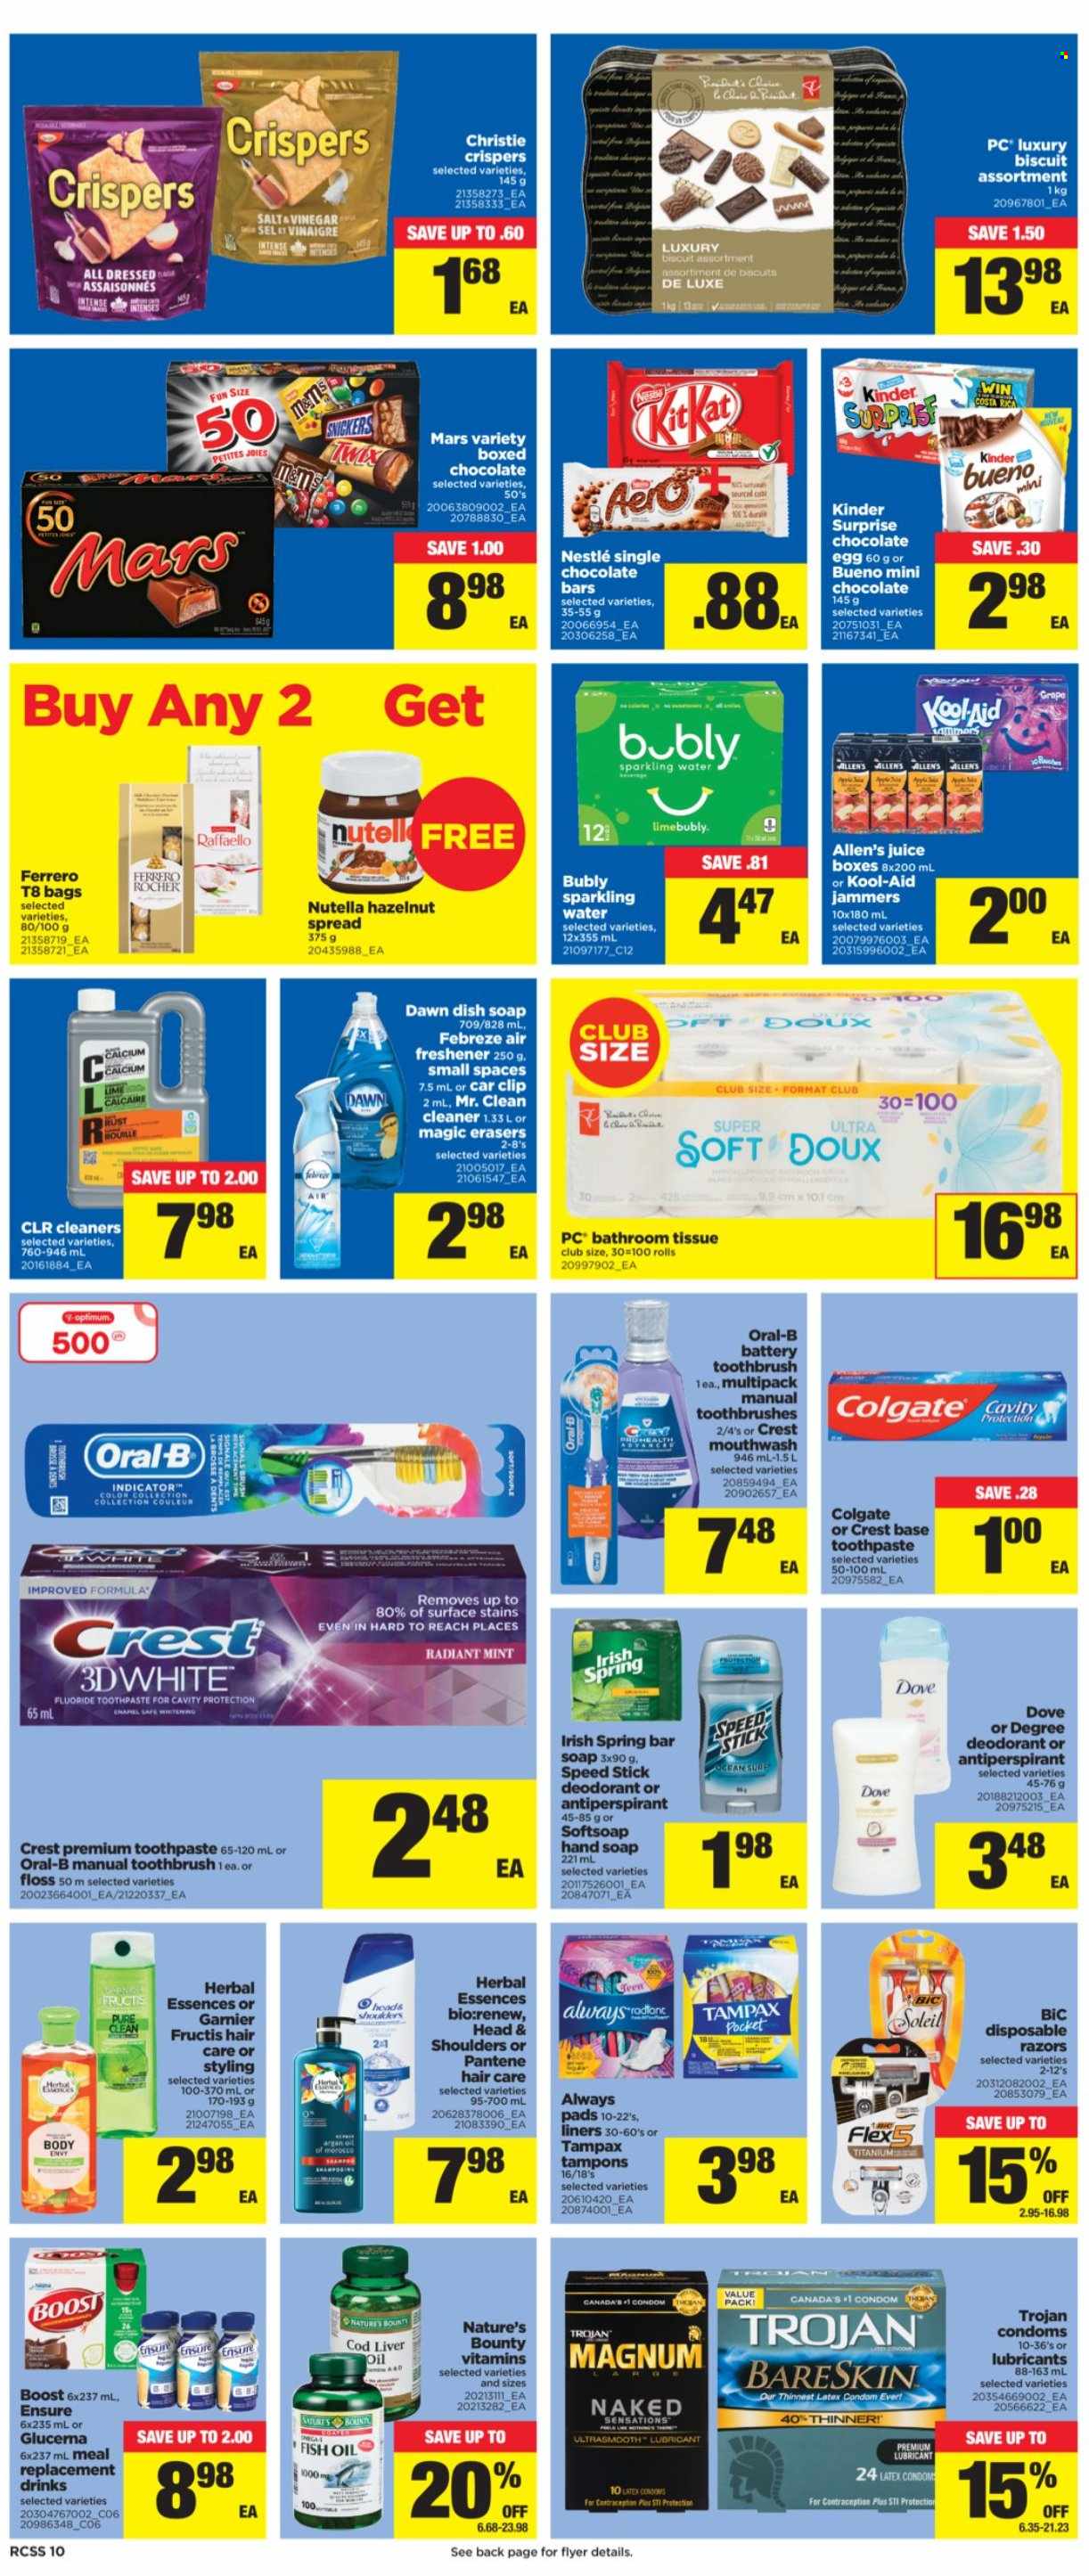 thumbnail - Real Canadian Superstore Flyer - September 23, 2021 - September 29, 2021 - Sales products - Ace, cod, eggs, Magnum, Snickers, Kinder Surprise, Mars, Raffaello, Kinder Bueno, biscuit, chocolate bar, salt, vinegar, oil, hazelnut spread, juice, sparkling water, Boost, bath tissue, Febreze, cleaner, Softsoap, hand soap, soap bar, soap, toothbrush, toothpaste, mouthwash, Crest, Always pads, tampons, Herbal Essences, Fructis, anti-perspirant, Speed Stick, BIC, lubricant, condom, air freshener, Optimum, fish oil, Nature's Bounty, Glucerna, Nestlé, calcium, Dove, Colgate, Garnier, Tampax, Head & Shoulders, Pantene, Nutella, Oral-B, Ferrero Rocher, deodorant. Page 10.